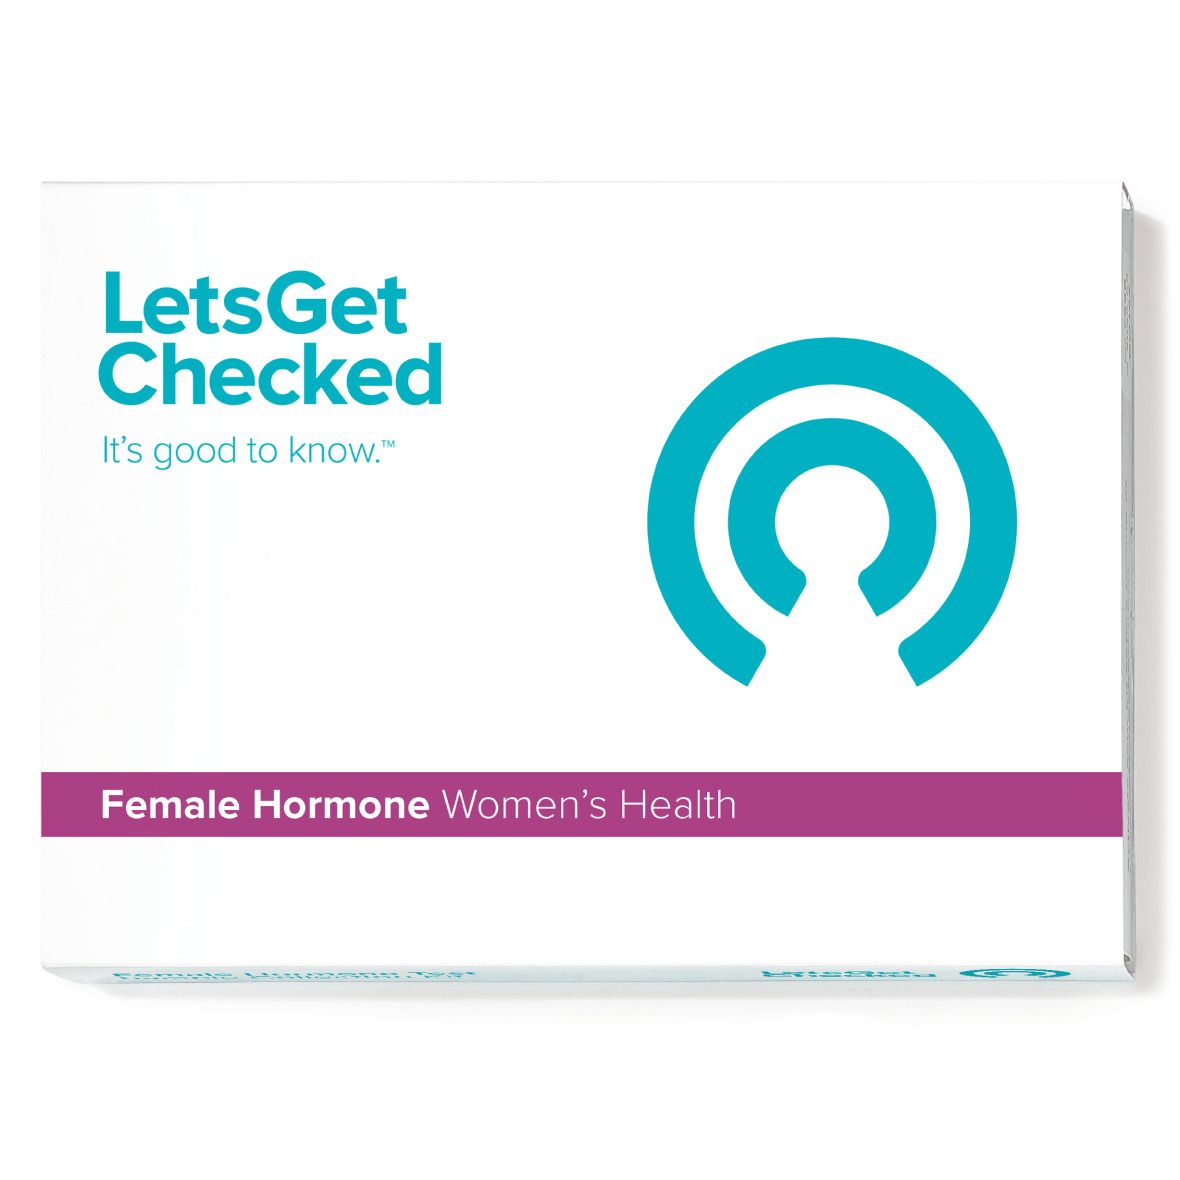 DISCLetsGetChecked Female Hormone Test